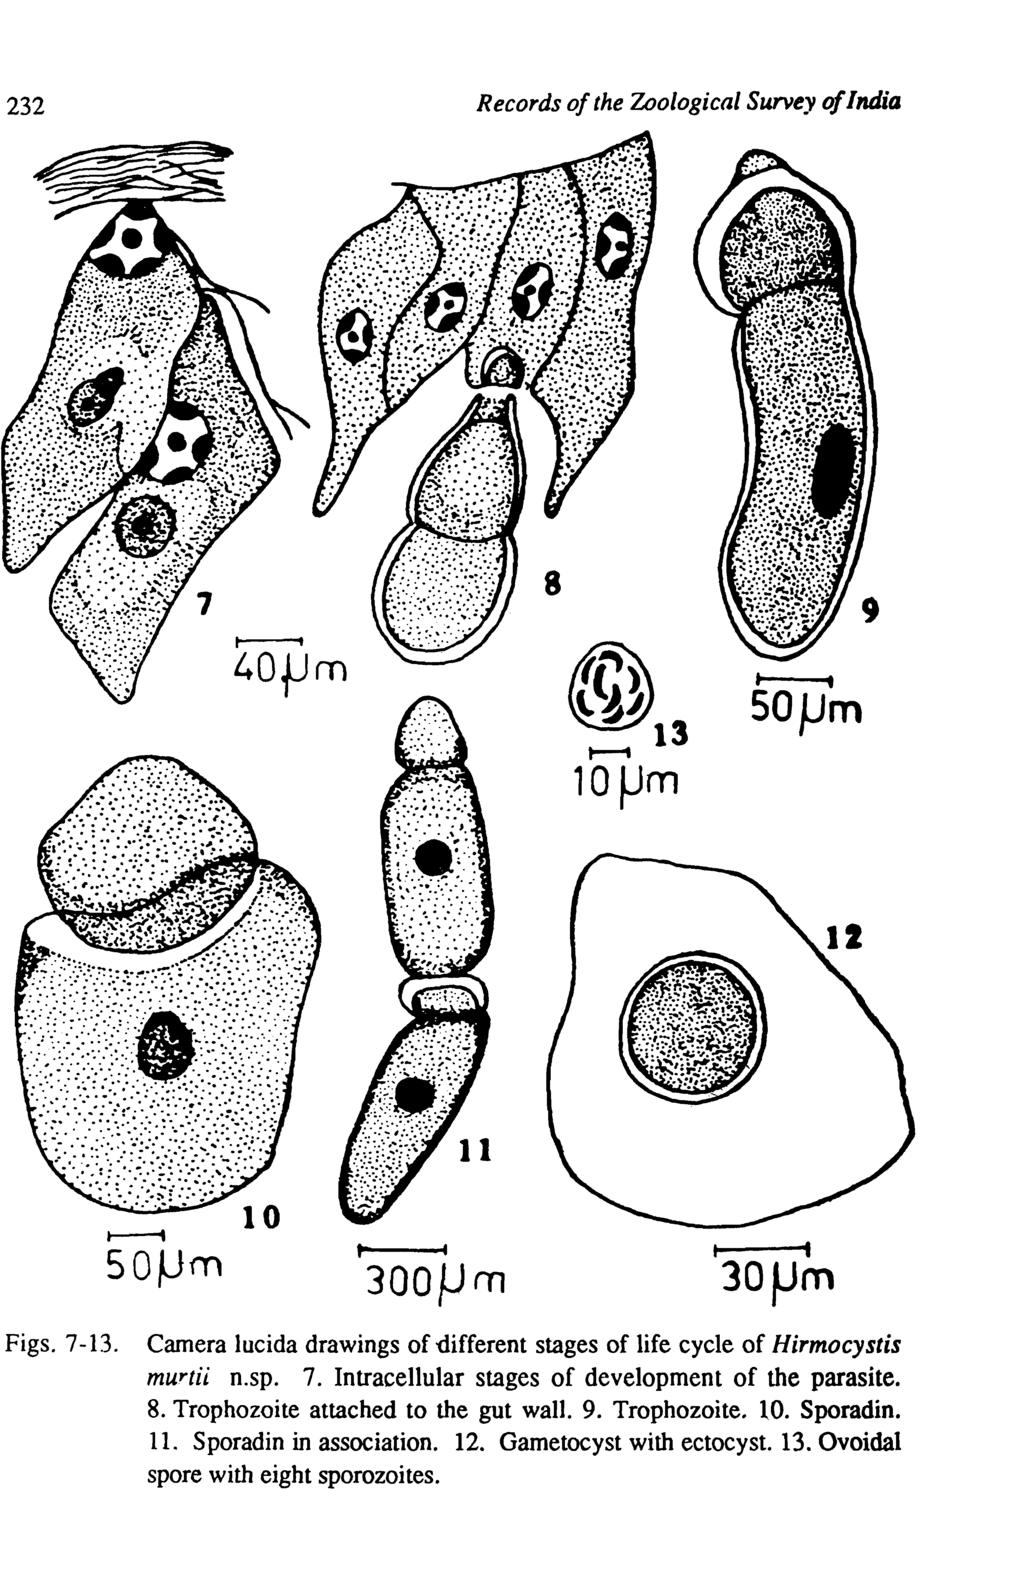 232 Records of the Zoological Survey of India 8 40fJm I SO}Jm S01Jm 300IJm 1 30fJm Figs. 7-13. Camera lucida drawings of -different stages of life cycle of Hirmocystis murtii n.sp. 7. Intracellular stages of development of the parasite.